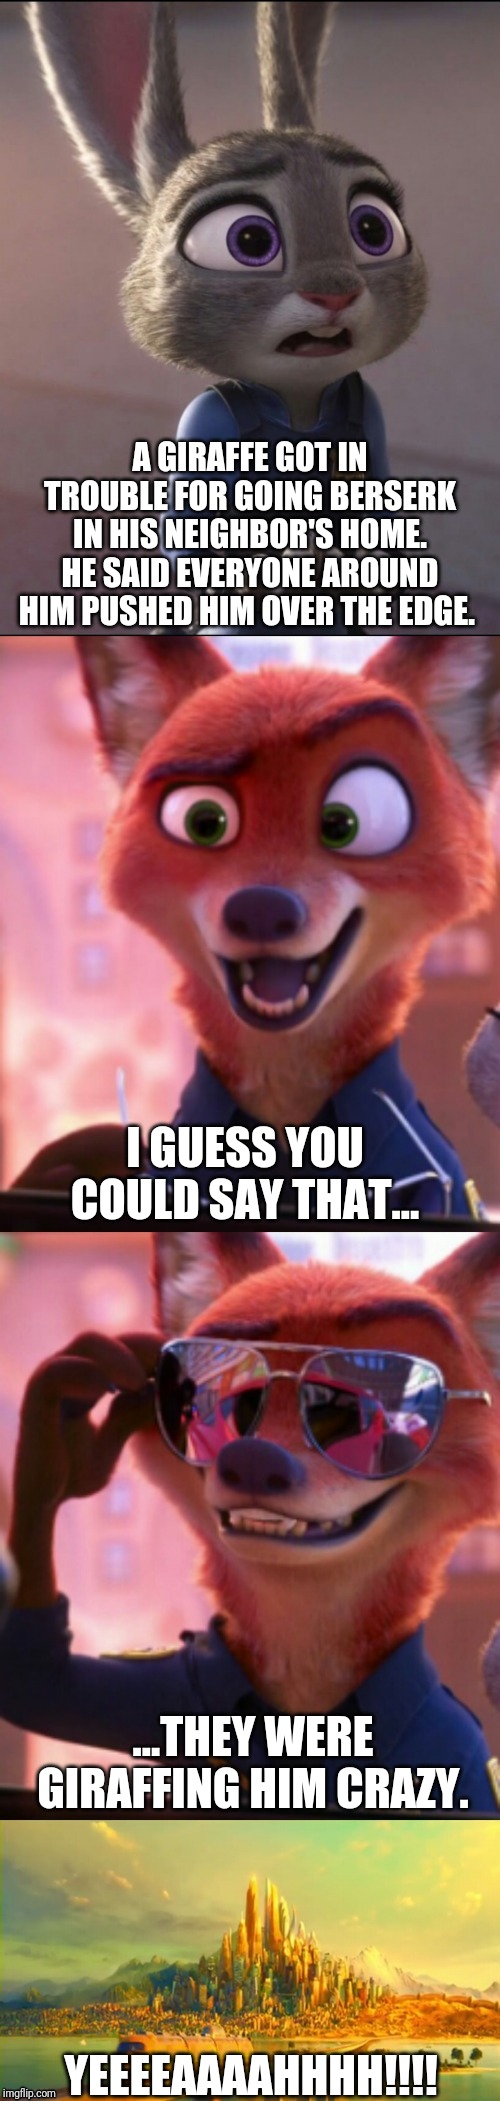 CSI: Zootopia 19 | A GIRAFFE GOT IN TROUBLE FOR GOING BERSERK IN HIS NEIGHBOR'S HOME. HE SAID EVERYONE AROUND HIM PUSHED HIM OVER THE EDGE. I GUESS YOU COULD SAY THAT... ...THEY WERE GIRAFFING HIM CRAZY. YEEEEAAAAHHHH!!!! | image tagged in csi zootopia,zootopia,judy hopps,nick wilde,parody,funny | made w/ Imgflip meme maker